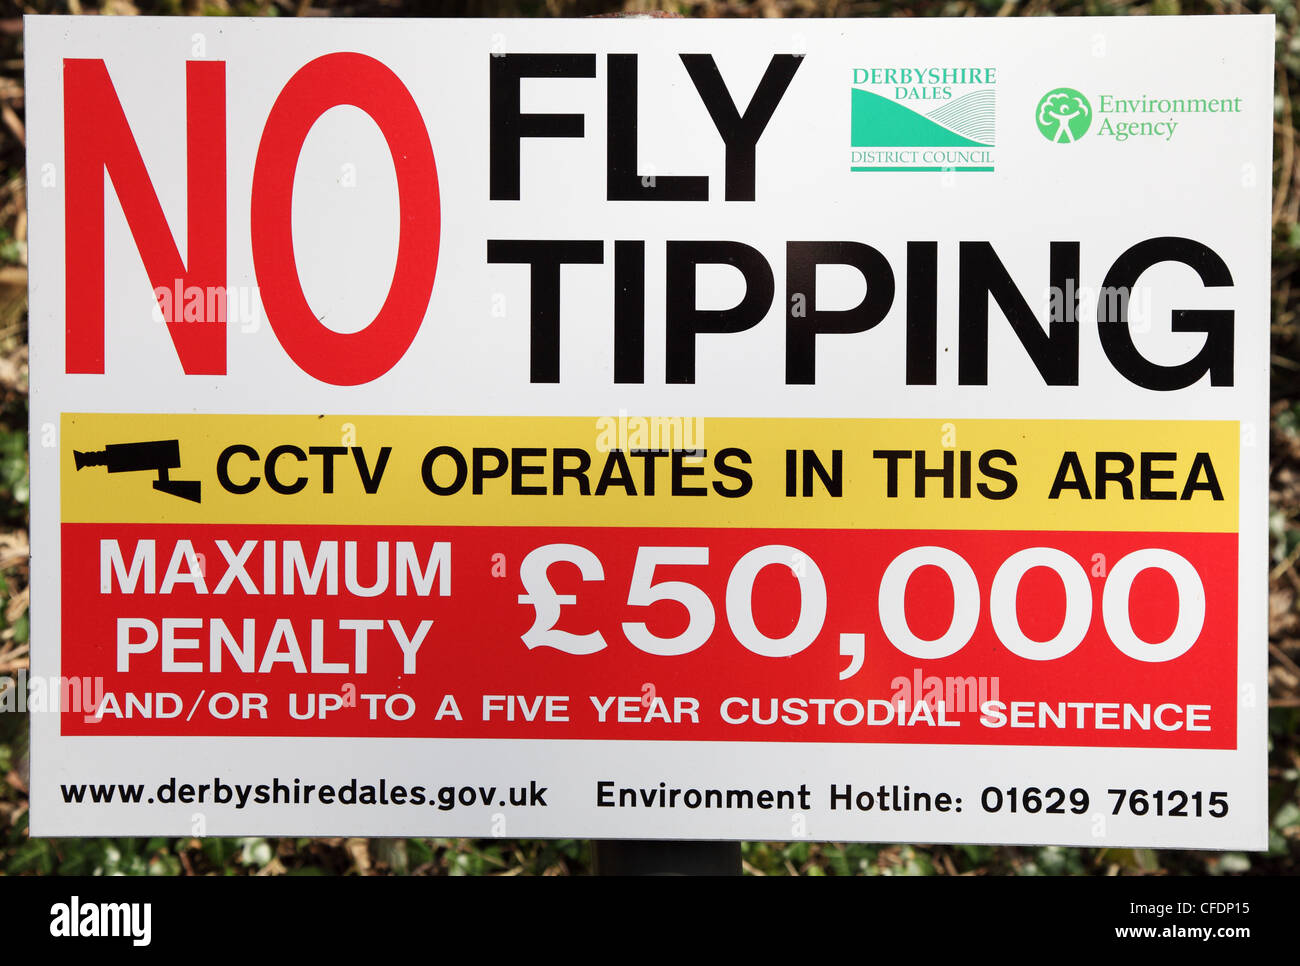 Notice or sign No Fly Tipping Maximum Penalty £50,000 Derbyshire England UK Stock Photo